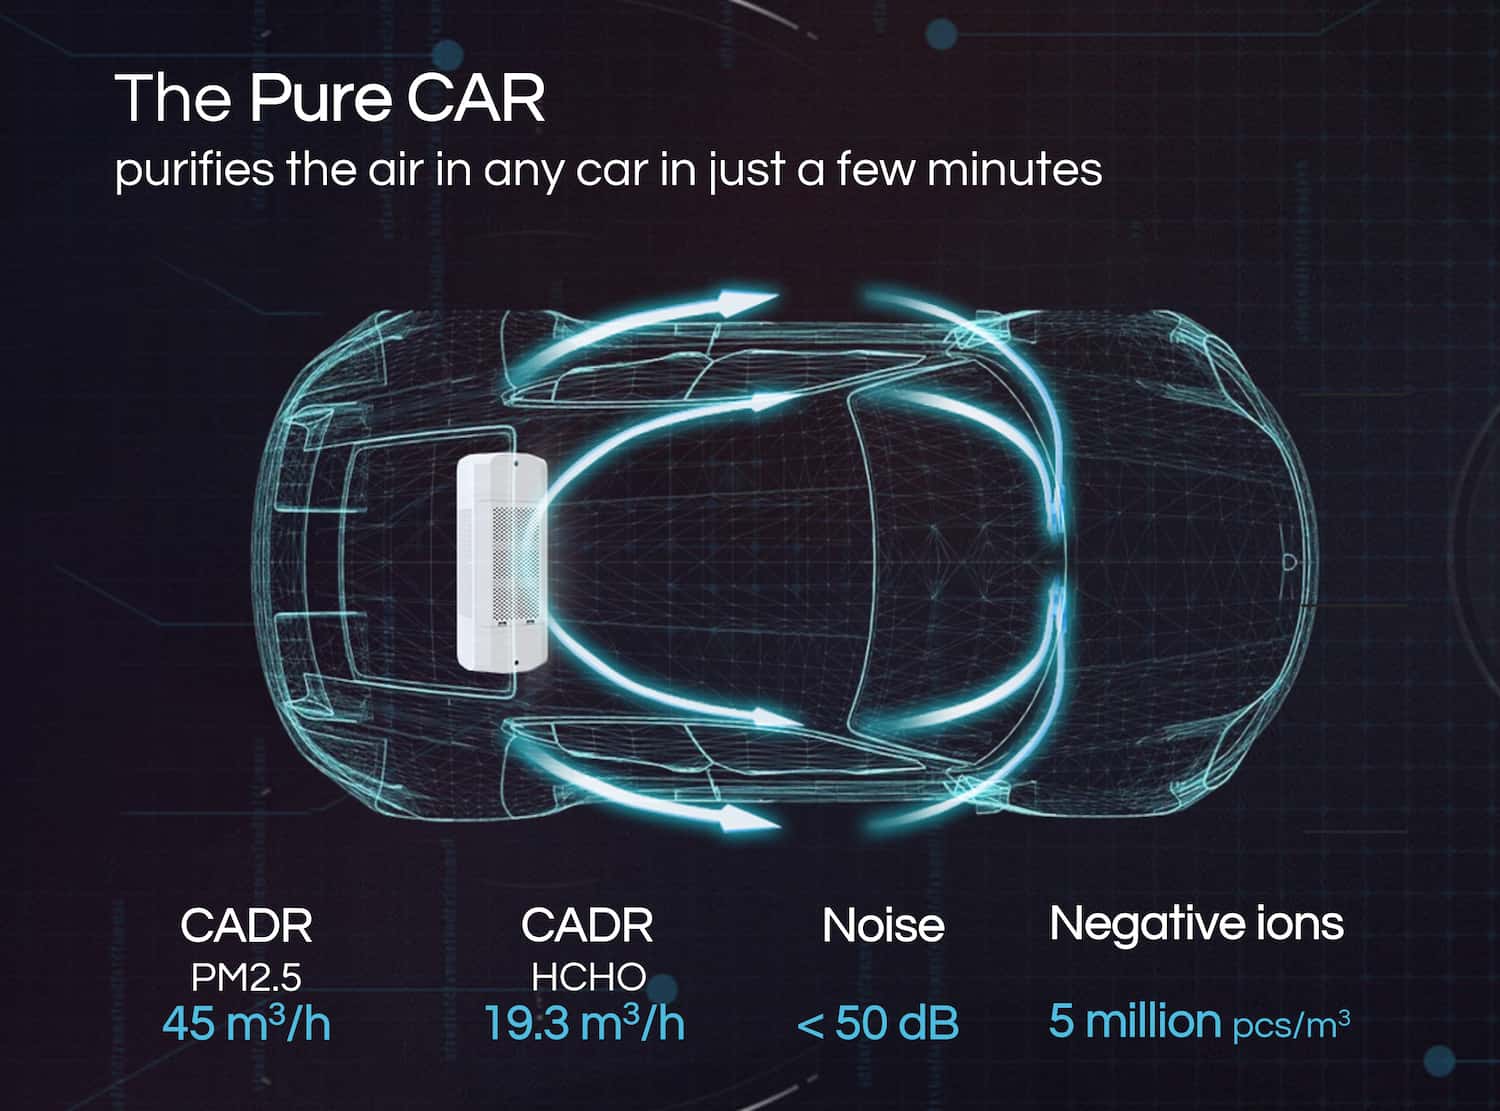 Powerful: the Pure CAR air purifier cleans the air in any vehicles quickly 